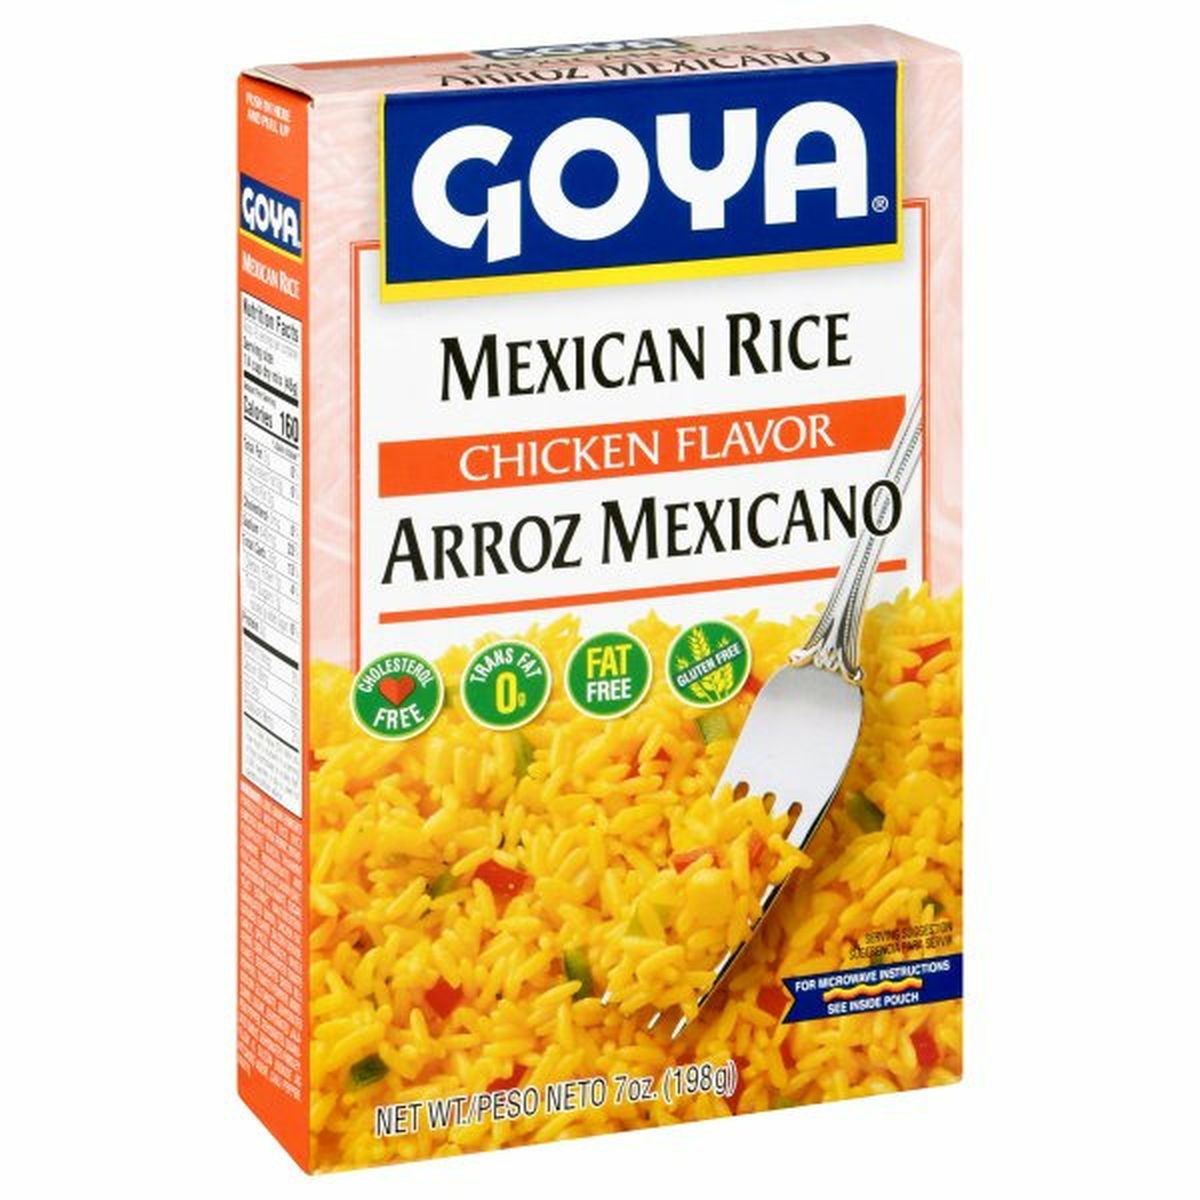 Calories in Goya Mexican Rice, Chicken